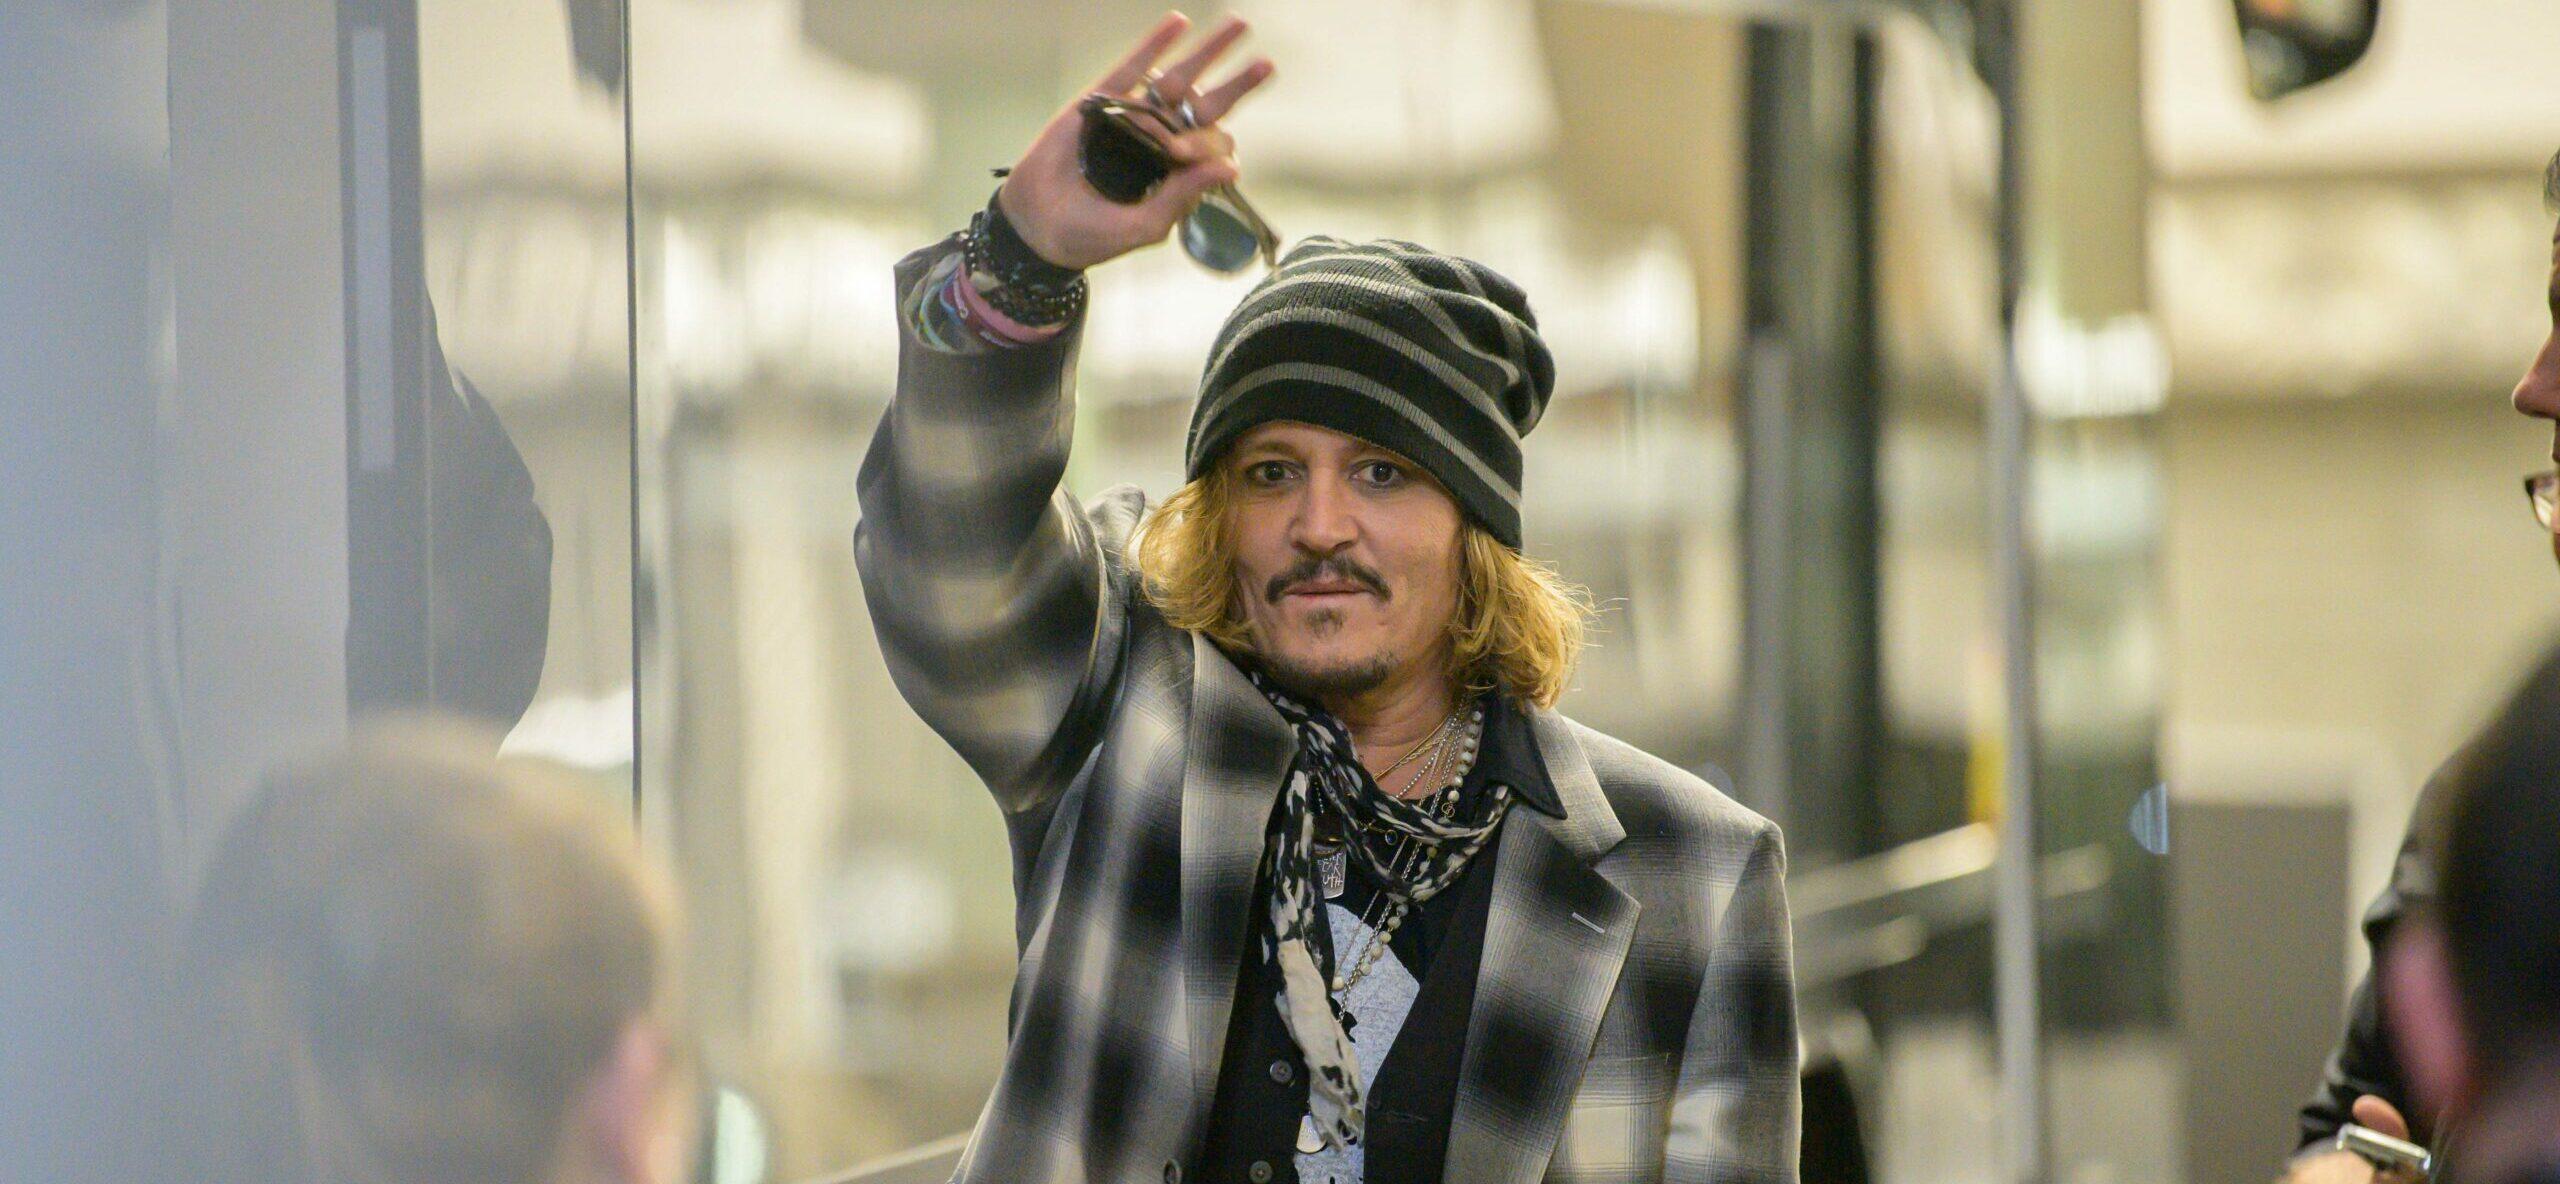 Johnny Depp in Glasgow to play a concert with his friend Jeff Beck at the Royal Concert Hall Hundreds of fans waited outside the stage door hoping for a glimpse of the Hollywood star